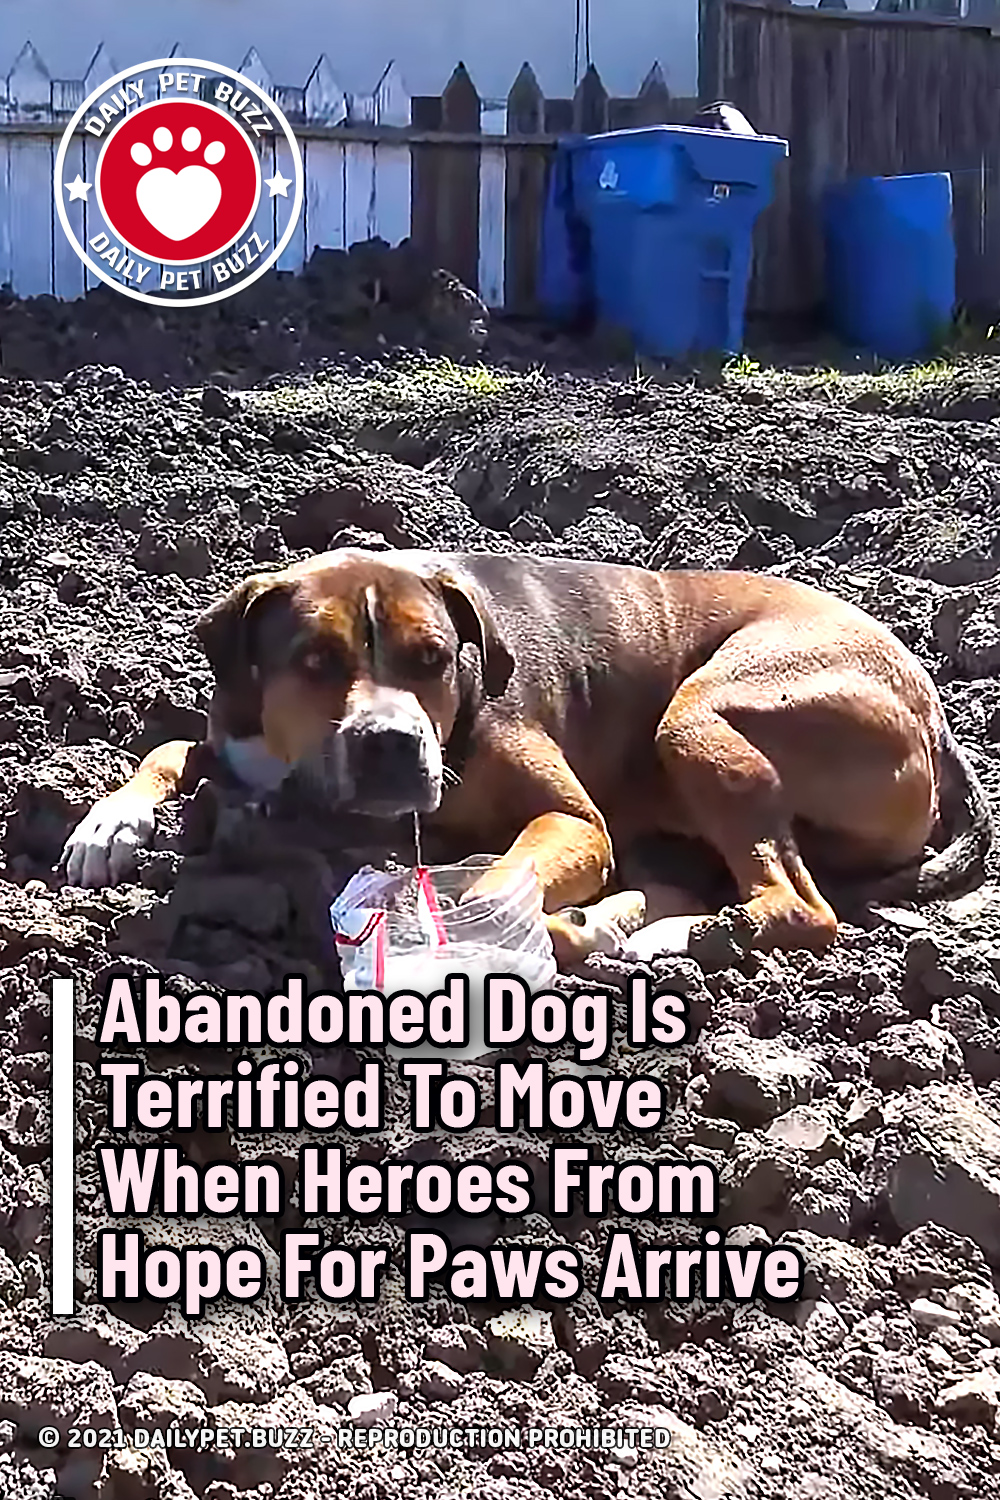 Abandoned Dog Is Terrified To Move When Heroes From Hope For Paws Arrive